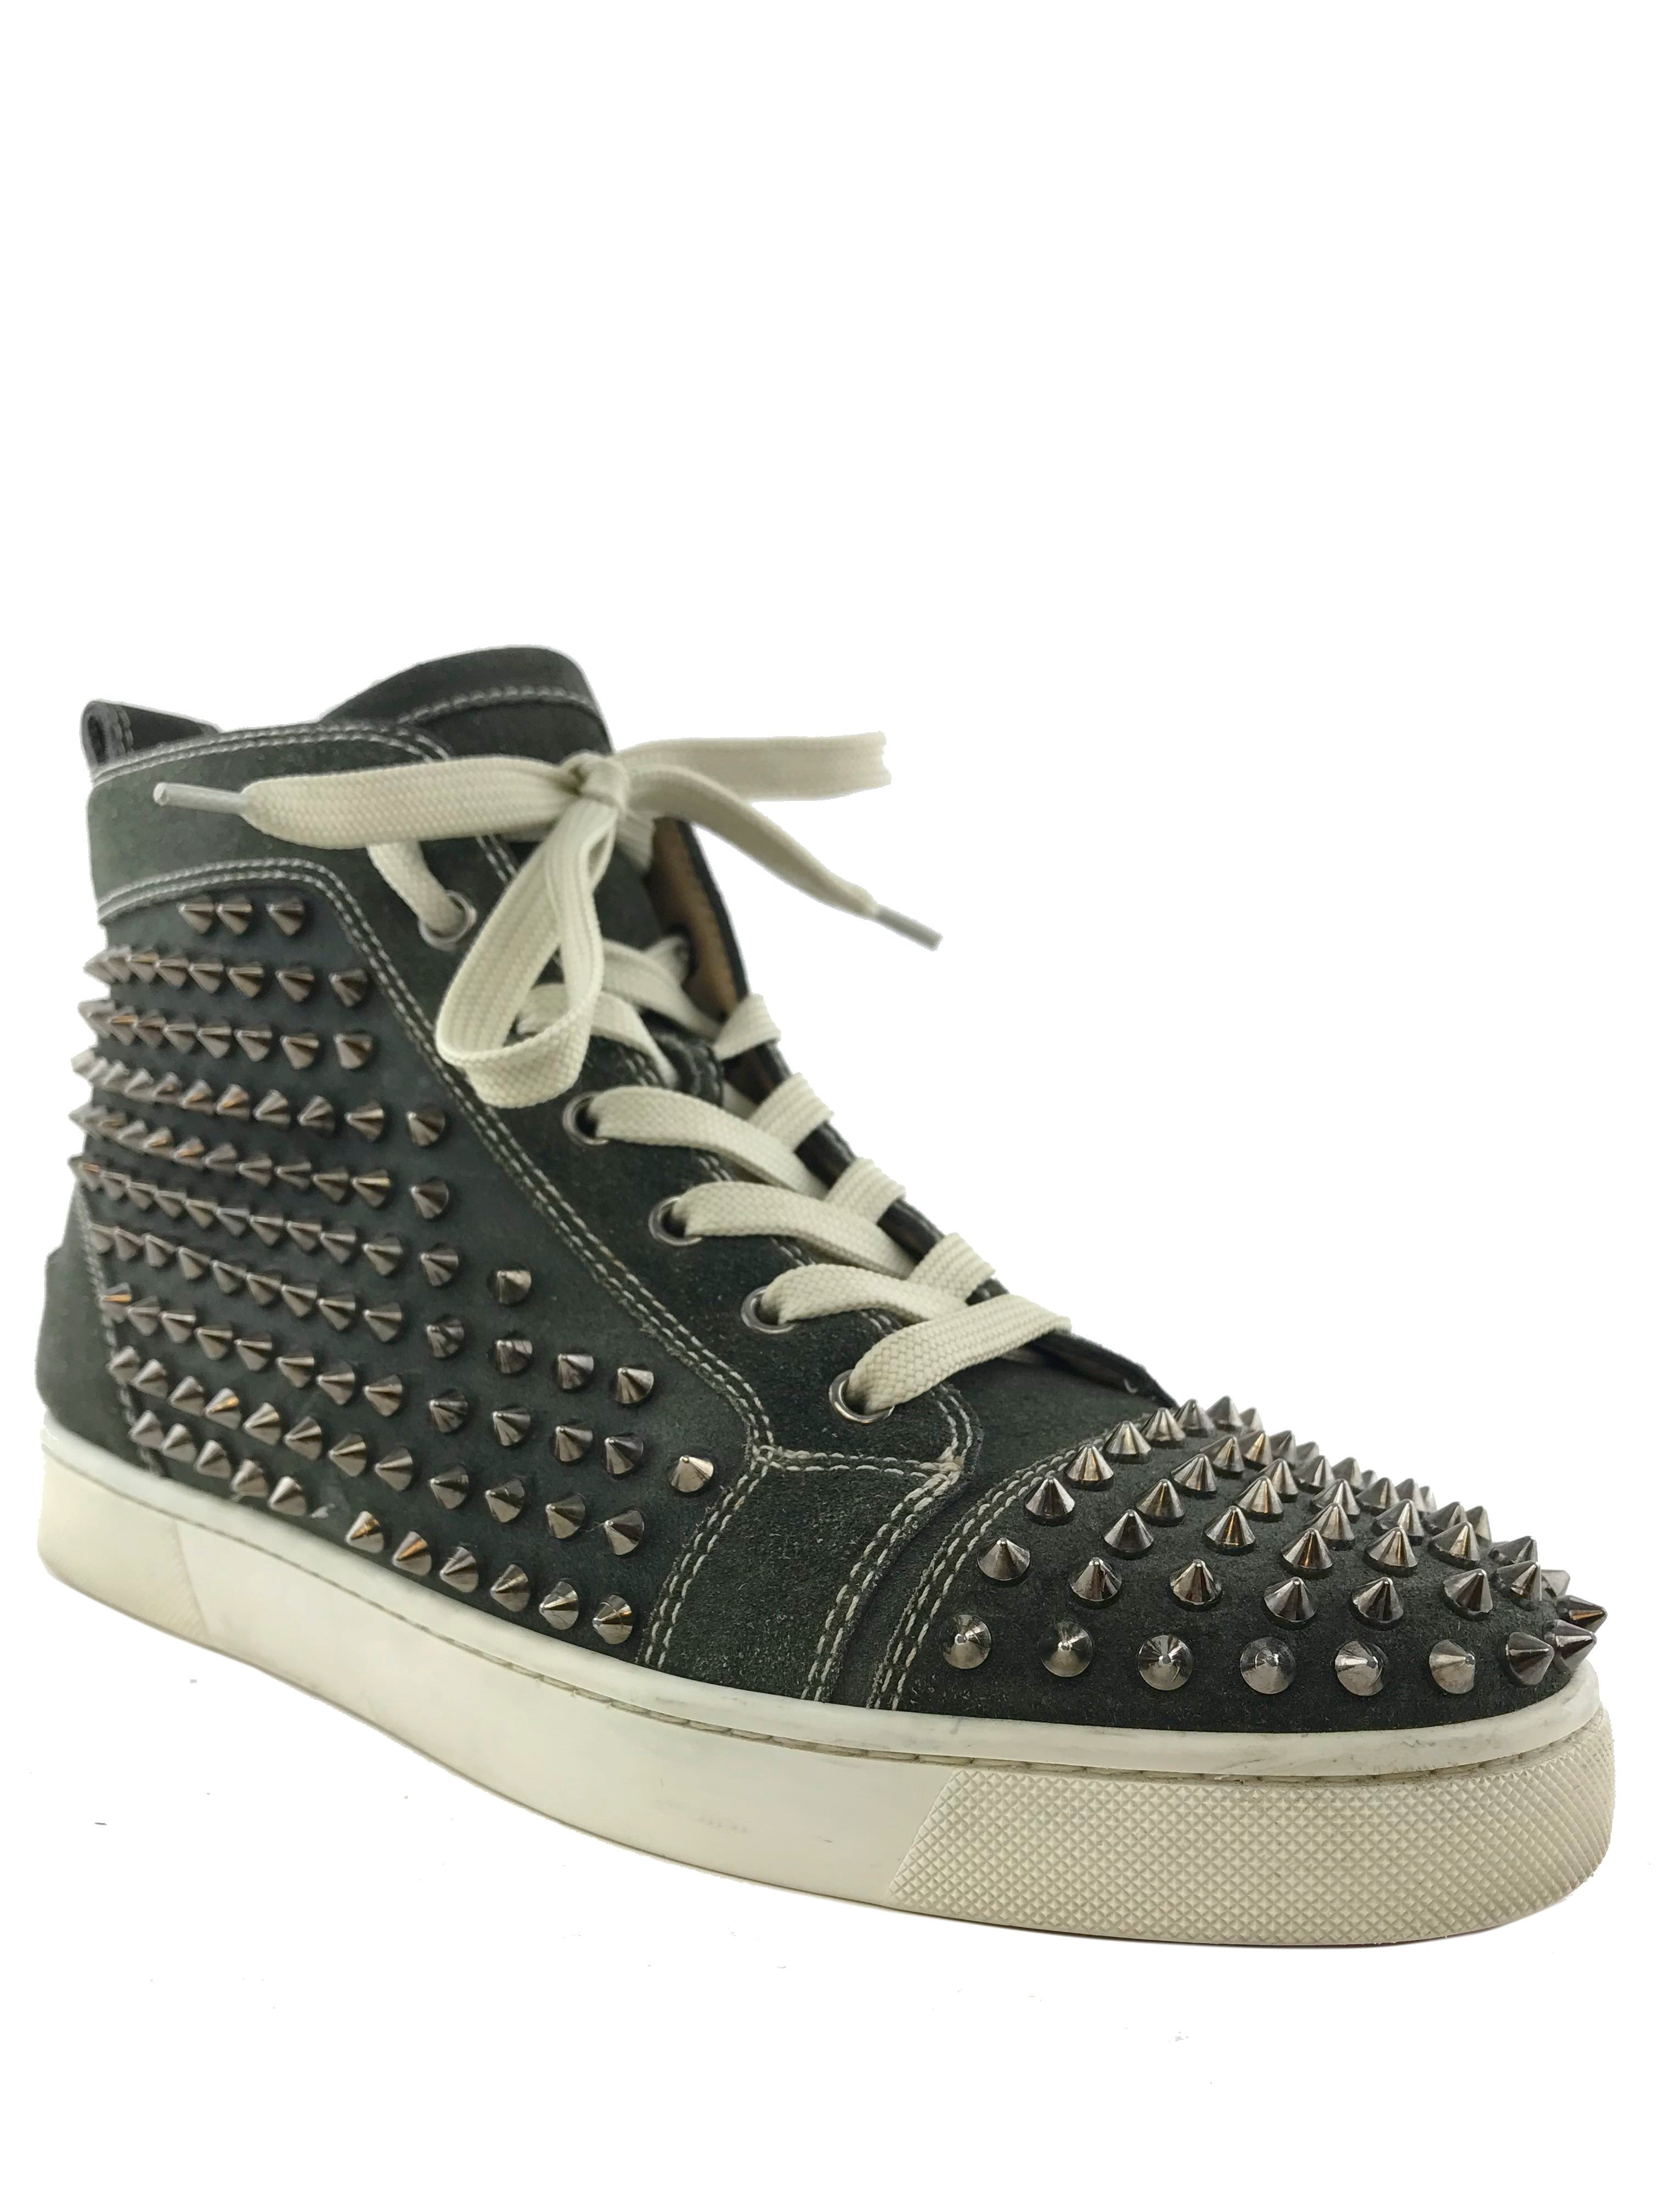 Christian Louboutin Men's Louis Spikes Sneakers Size 8 - Consigned